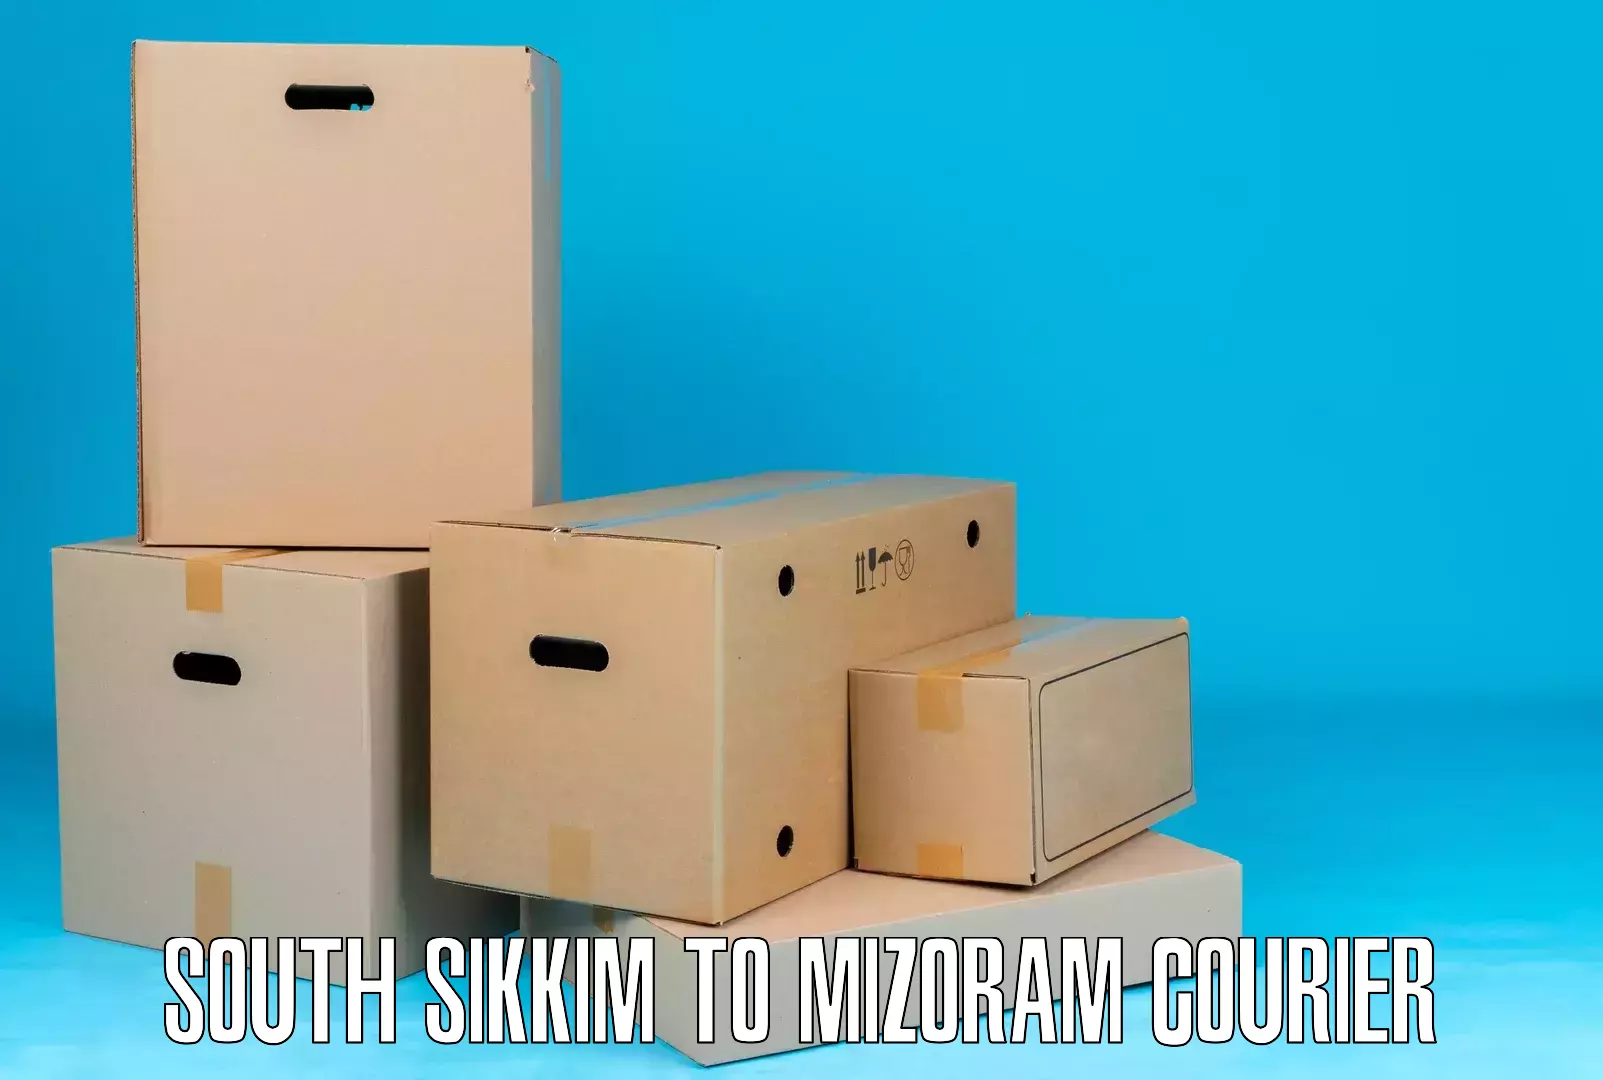 Business shipping needs South Sikkim to Aizawl